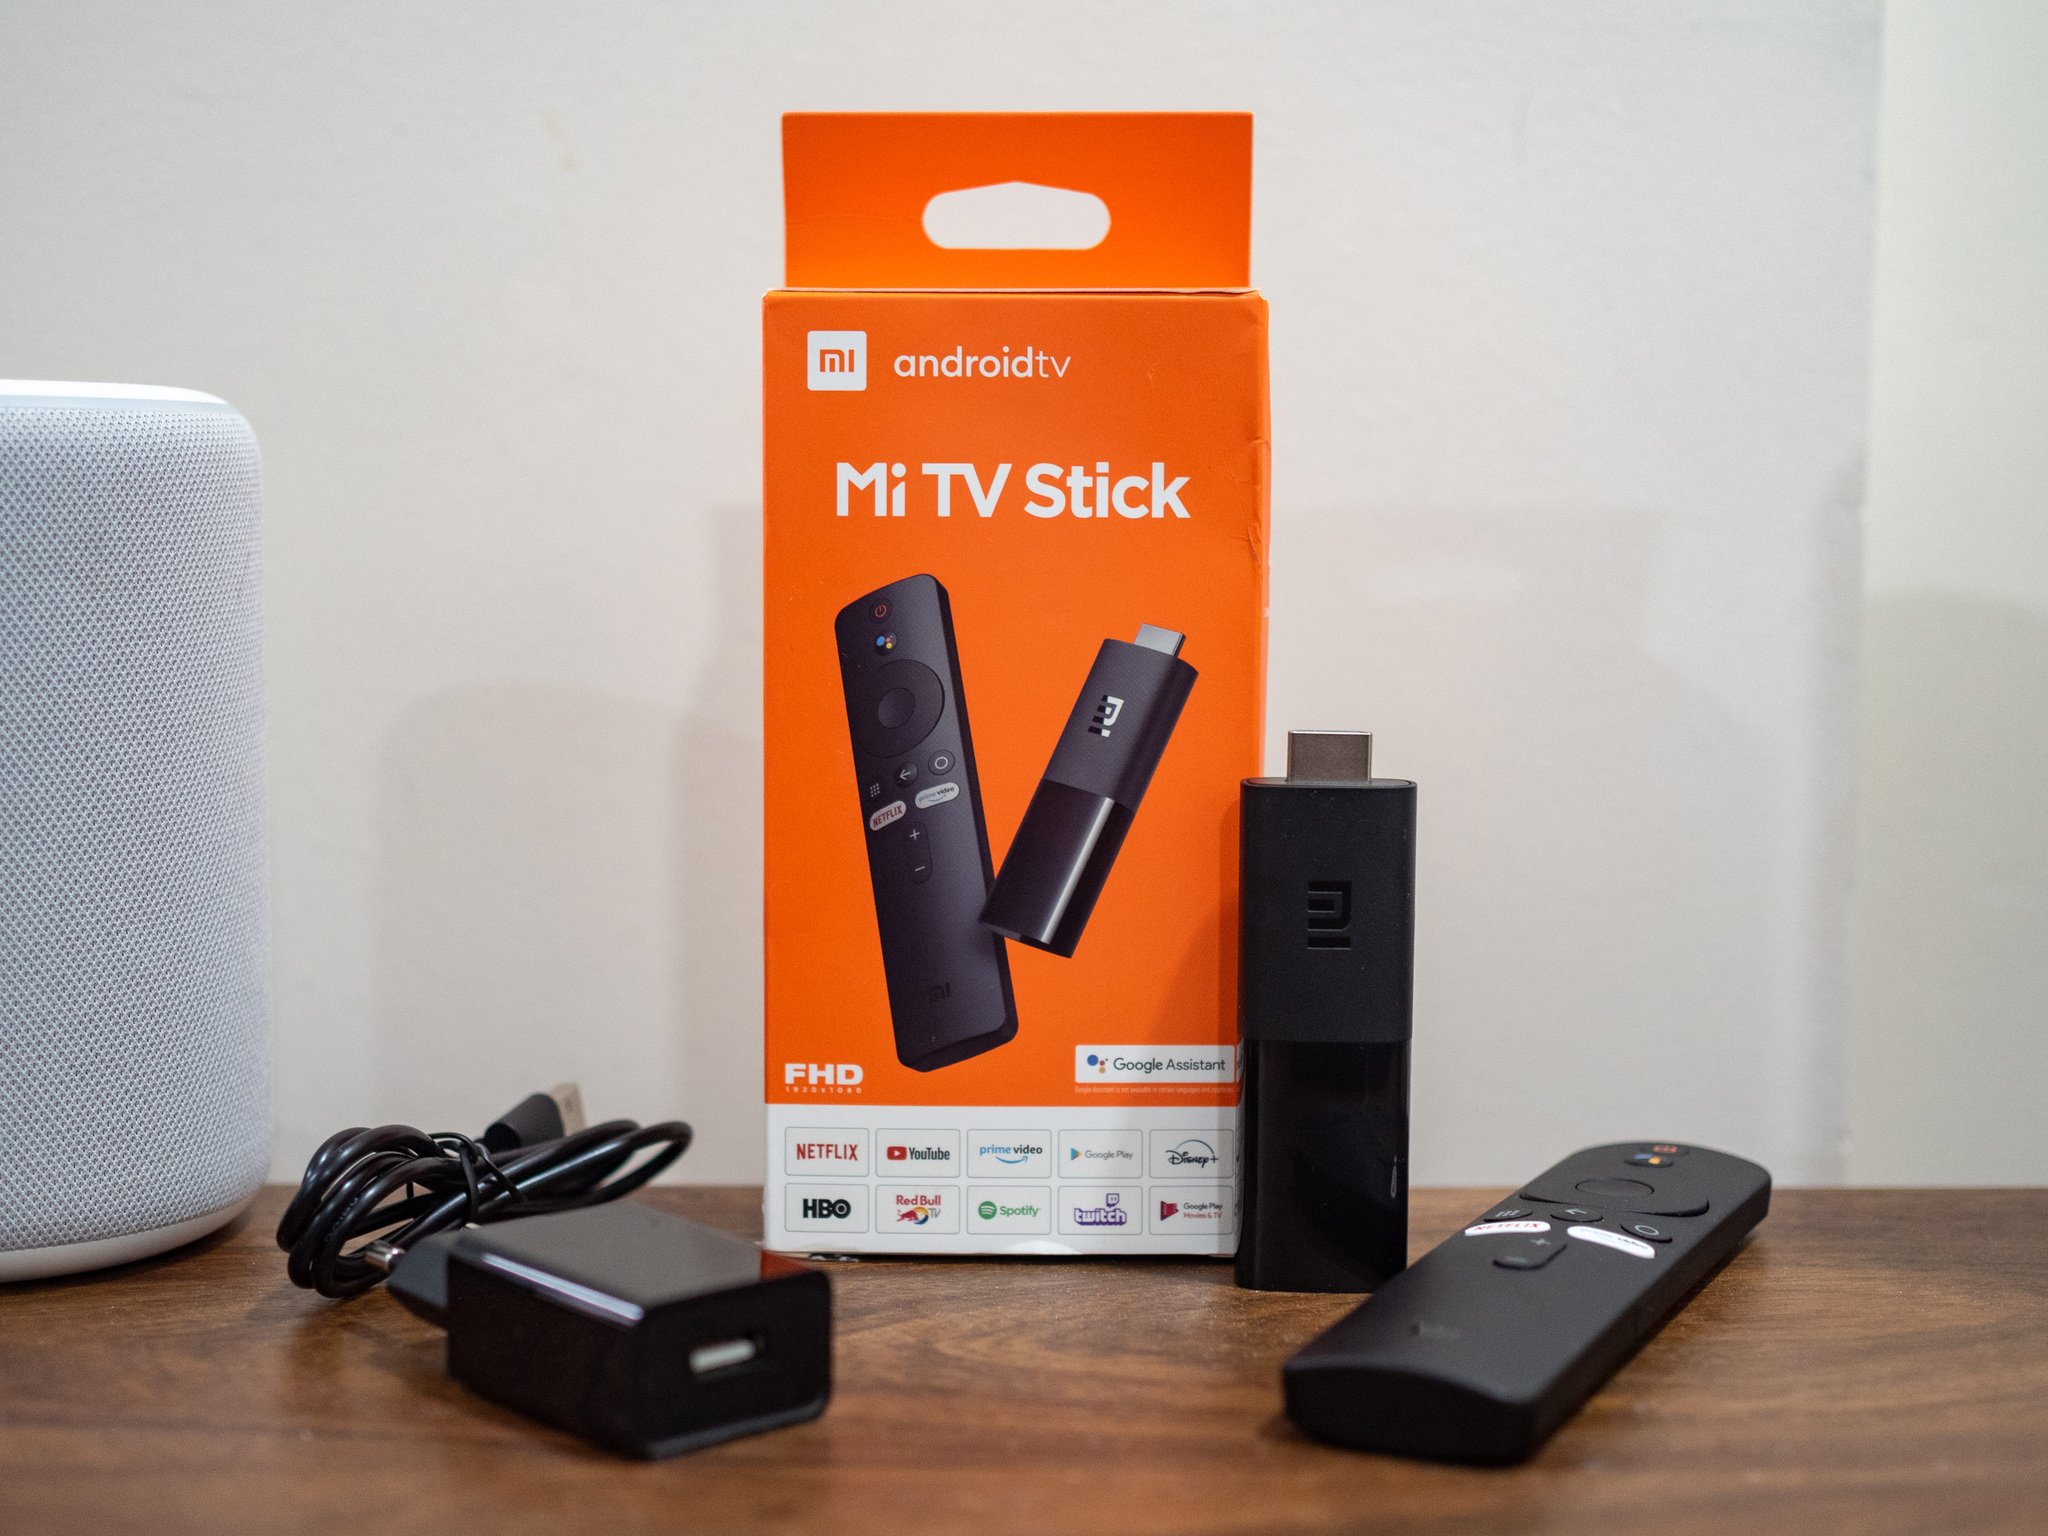 Xiaomi Mi TV Stick review: Lagging behind the competition